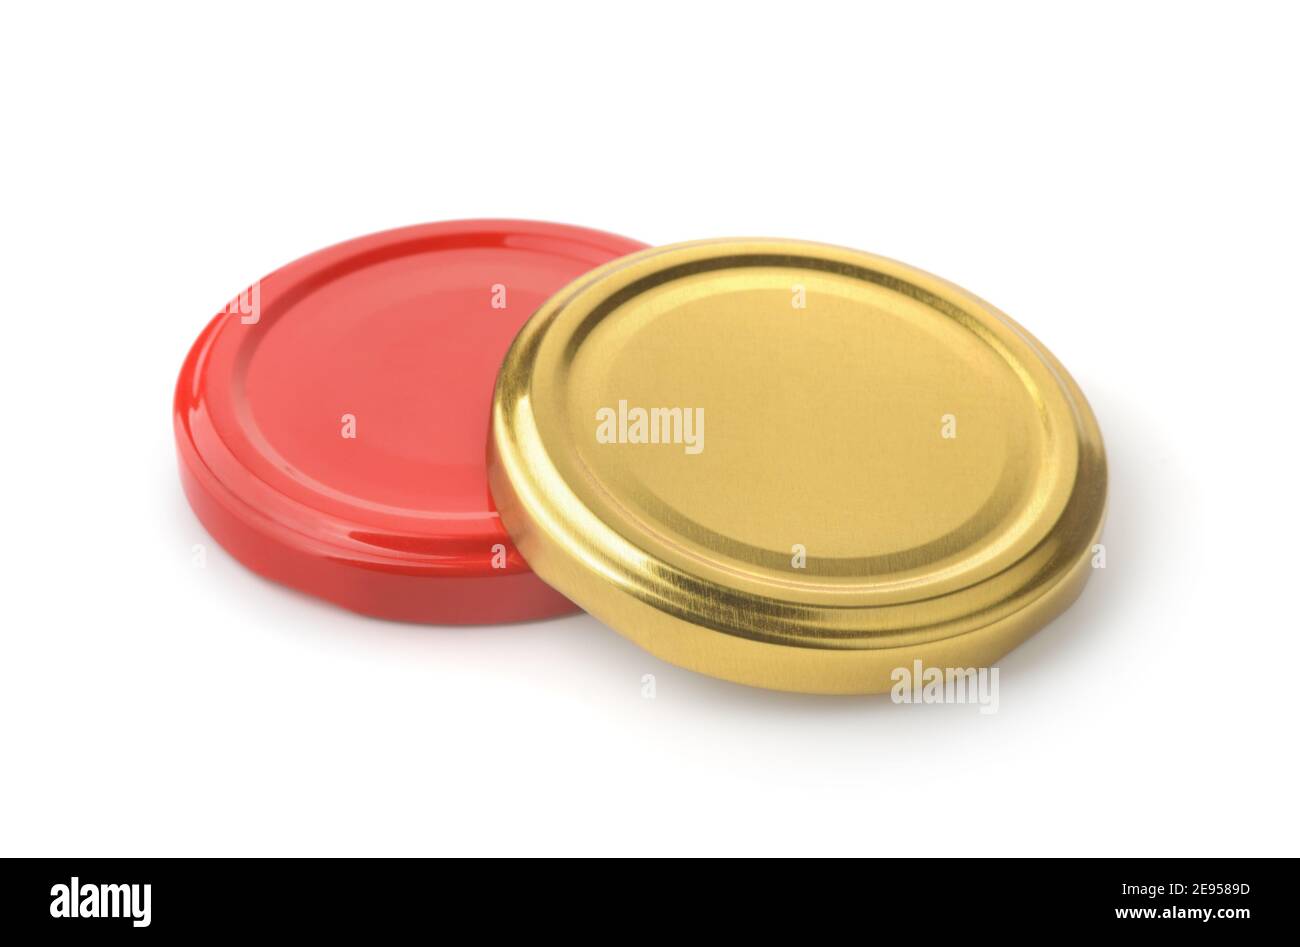 Two gold and red metal jar lids isolated on white Stock Photo